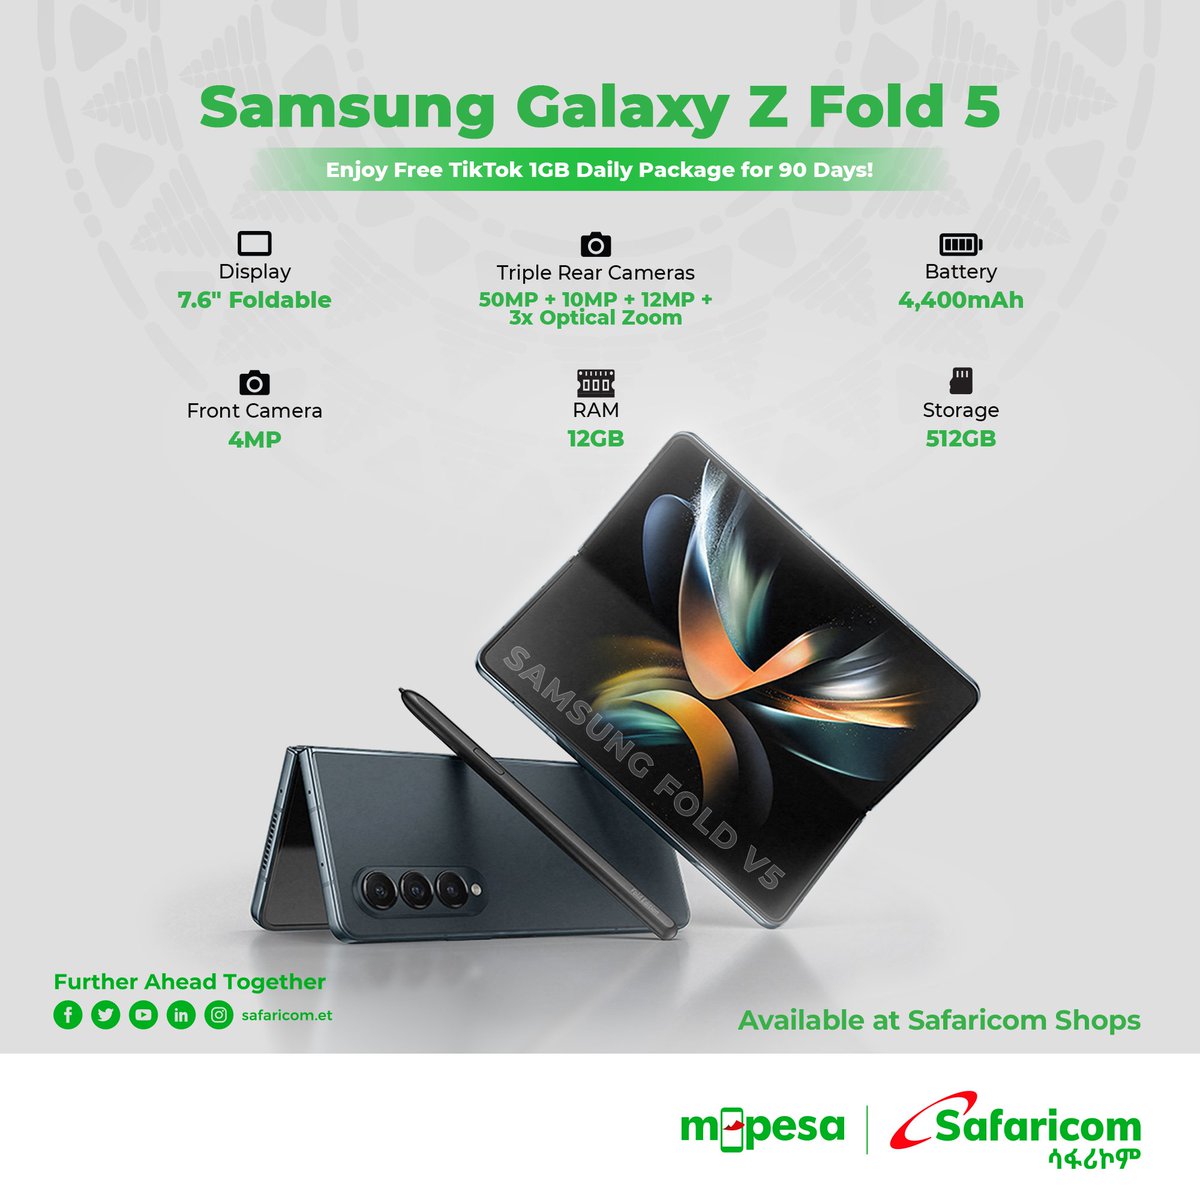 Happy Holidays! Unfold a world of possibilities at Safaricom Ethiopia even further! The next generation of folding phones, the Samsung Galaxy Z Fold 5, is here. Get yours today and unlock a massive screen, powerful performance, and a truly immersive experience.